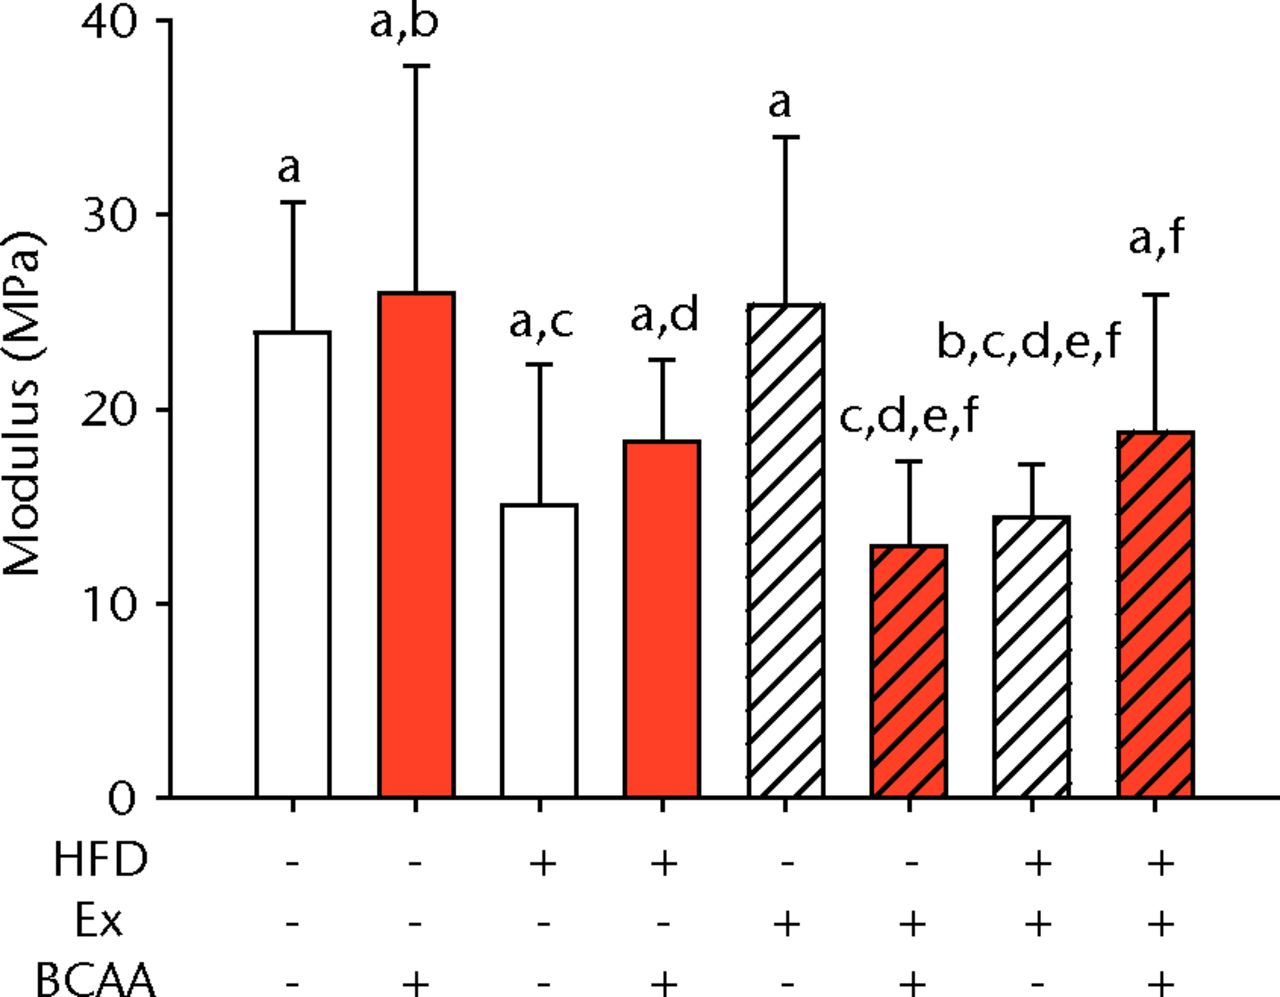 Figs. 2a - 2d 
            Bar charts of biomechanical
parameters, showing the mean a) tendon cross-section area, b) modulus,
c) maximum load and d) stiffness. Biomechanical parameters with
significant changes. For tendon cross-section (a), groups not sharing
a letter (‘a’ or ‘b’) are significantly different, based on a significant
main effect for high fat diet (HFD) and no other significant main
effects or interactions. For modulus (b), groups not sharing a letter
(‘a’, ‘b’, ‘c’, ‘d’, ‘e’, or ‘f’) are significantly different, based
on post-hoc comparisons following a significant
three-way interaction between HFD, exercise (Ex), and branched-chain
amino acid (BCAA). For maximum load (c), groups not sharing a letter
(‘a’ or ‘b’) are significantly different, based on a significant
main effect for exercise and no other significant main effects or
interactions. For stiffness (d), groups not sharing a letter (‘a’
or ‘b’) are significantly different, based on post-hoc comparisons
following significant two-way interactions between HFD and BCAA
as well as between exercise and BCAA. Error bars indicate standard
deviation.
          